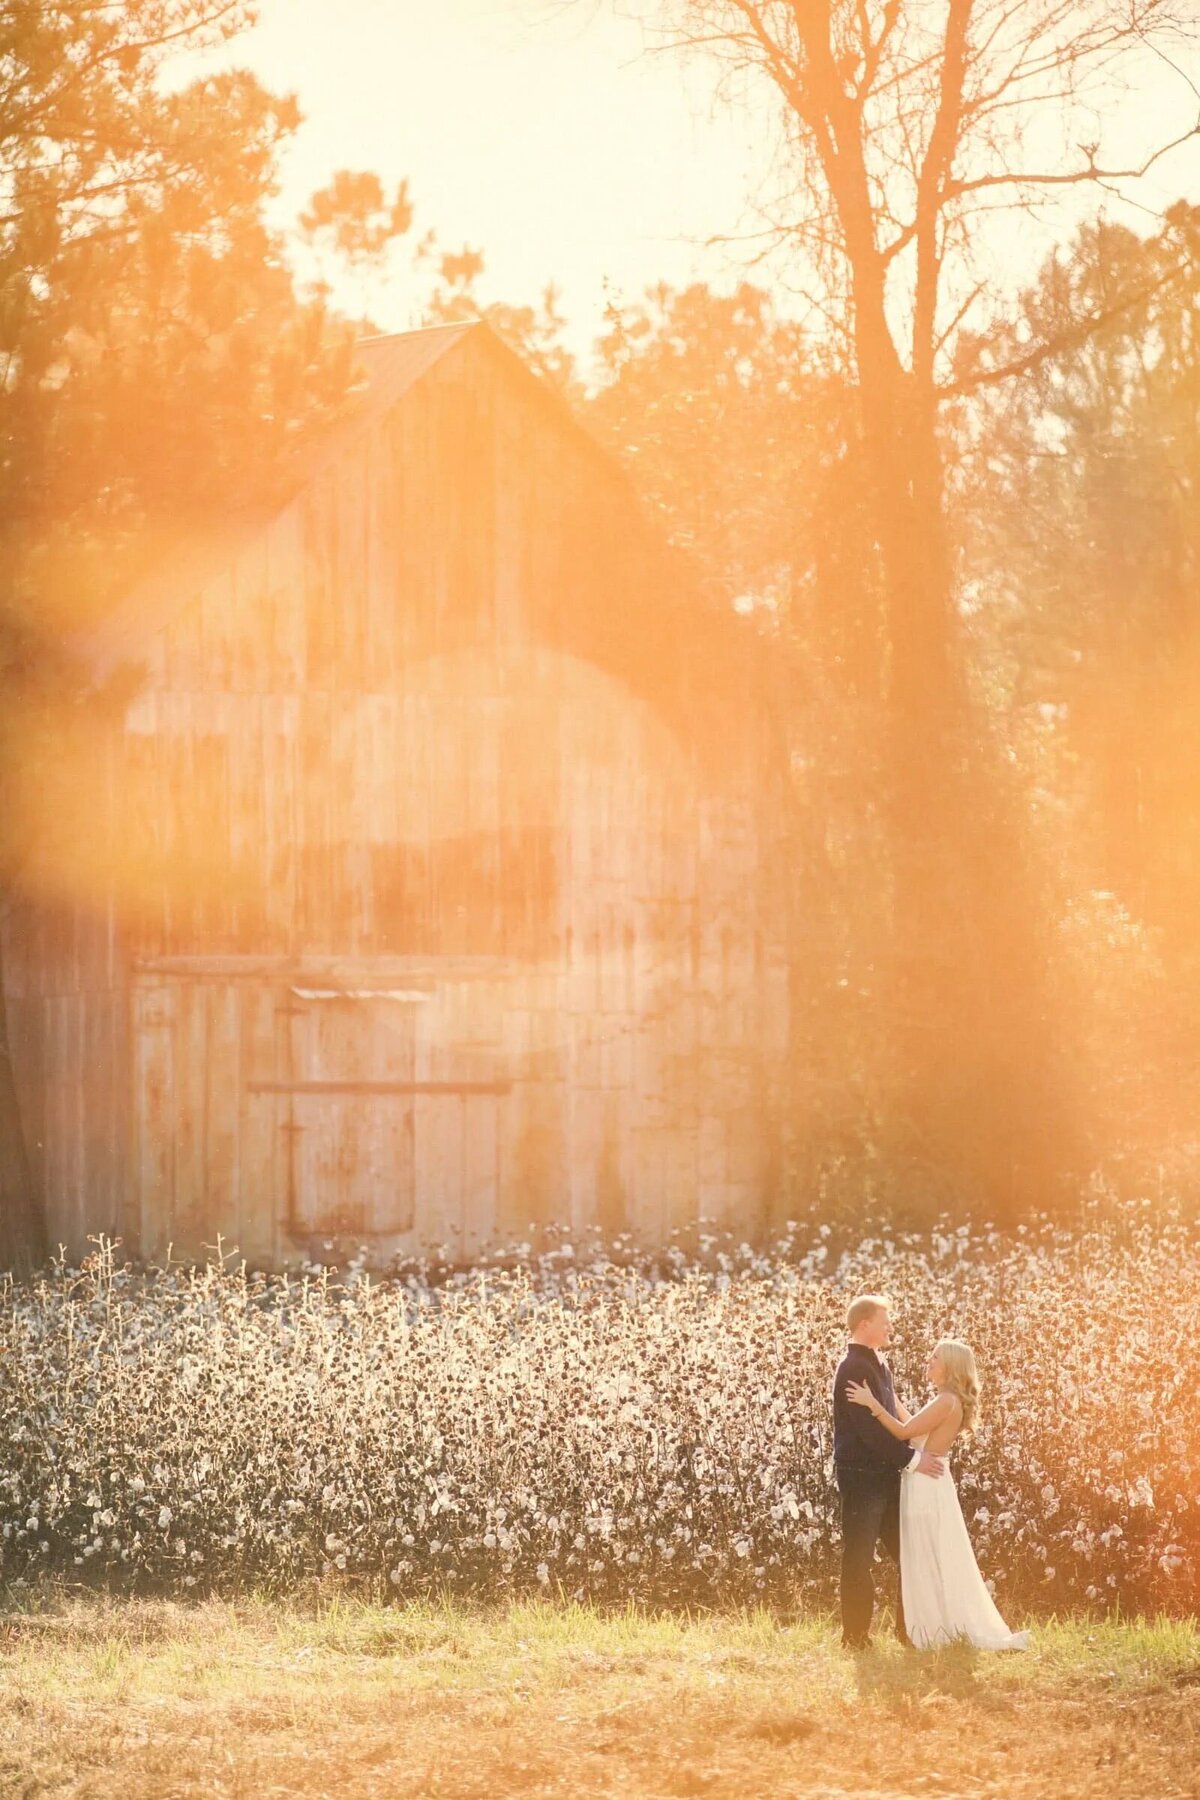 Couple embracing in front of an old barn, bathed in the golden light of sunset, with a field of cotton framing the scene